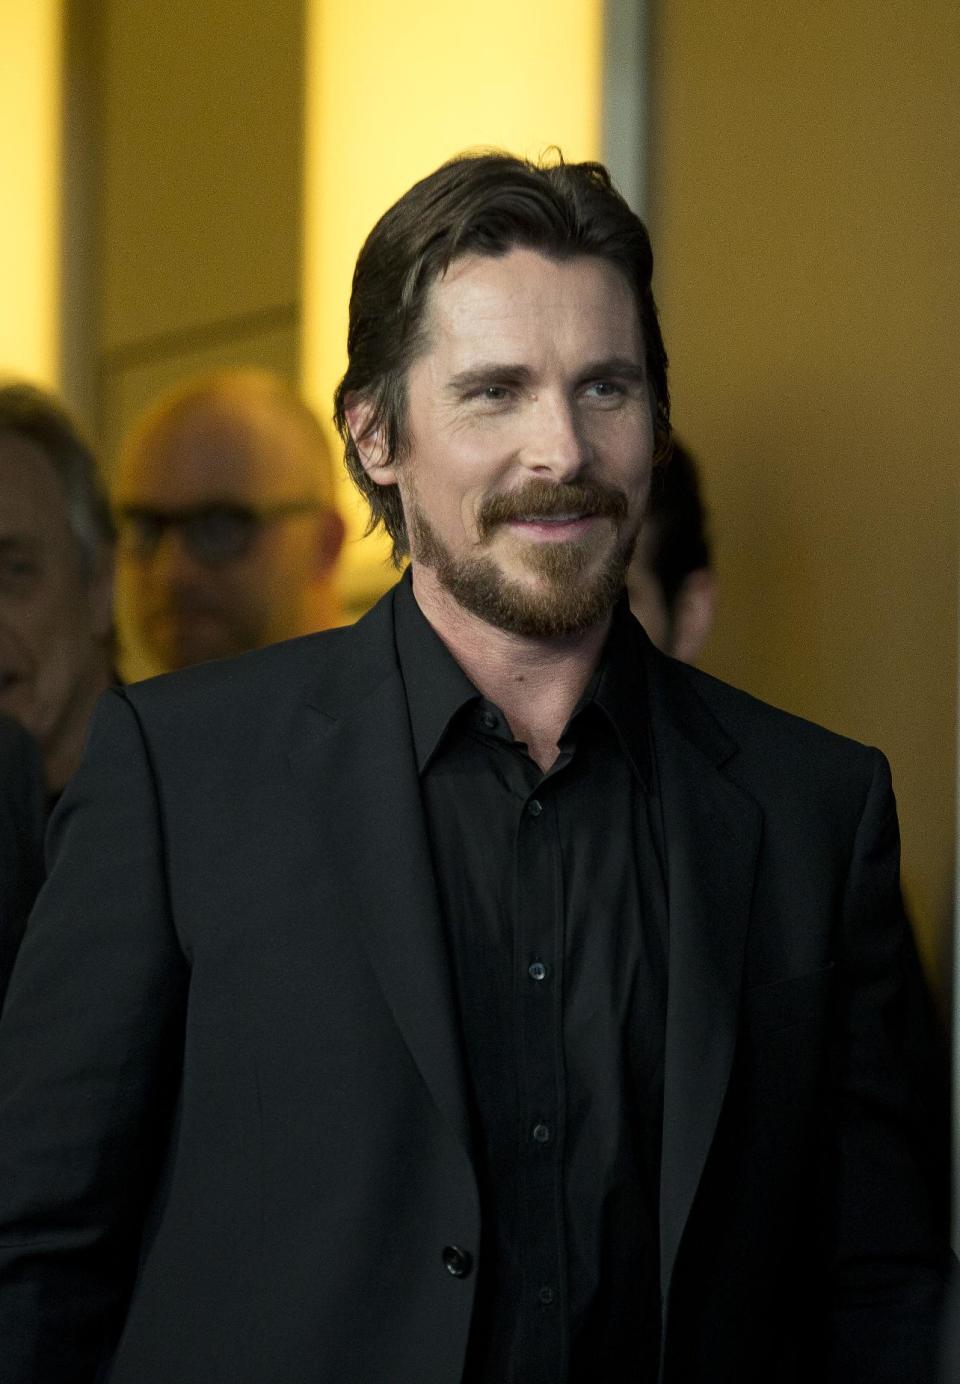 Actor Christian Bale jokingly arrives at the photo call for the film American Hustle during the International Film Festival Berlinale, in Berlin, Friday, Feb. 7, 2014. (AP Photo/Axel Schmidt)